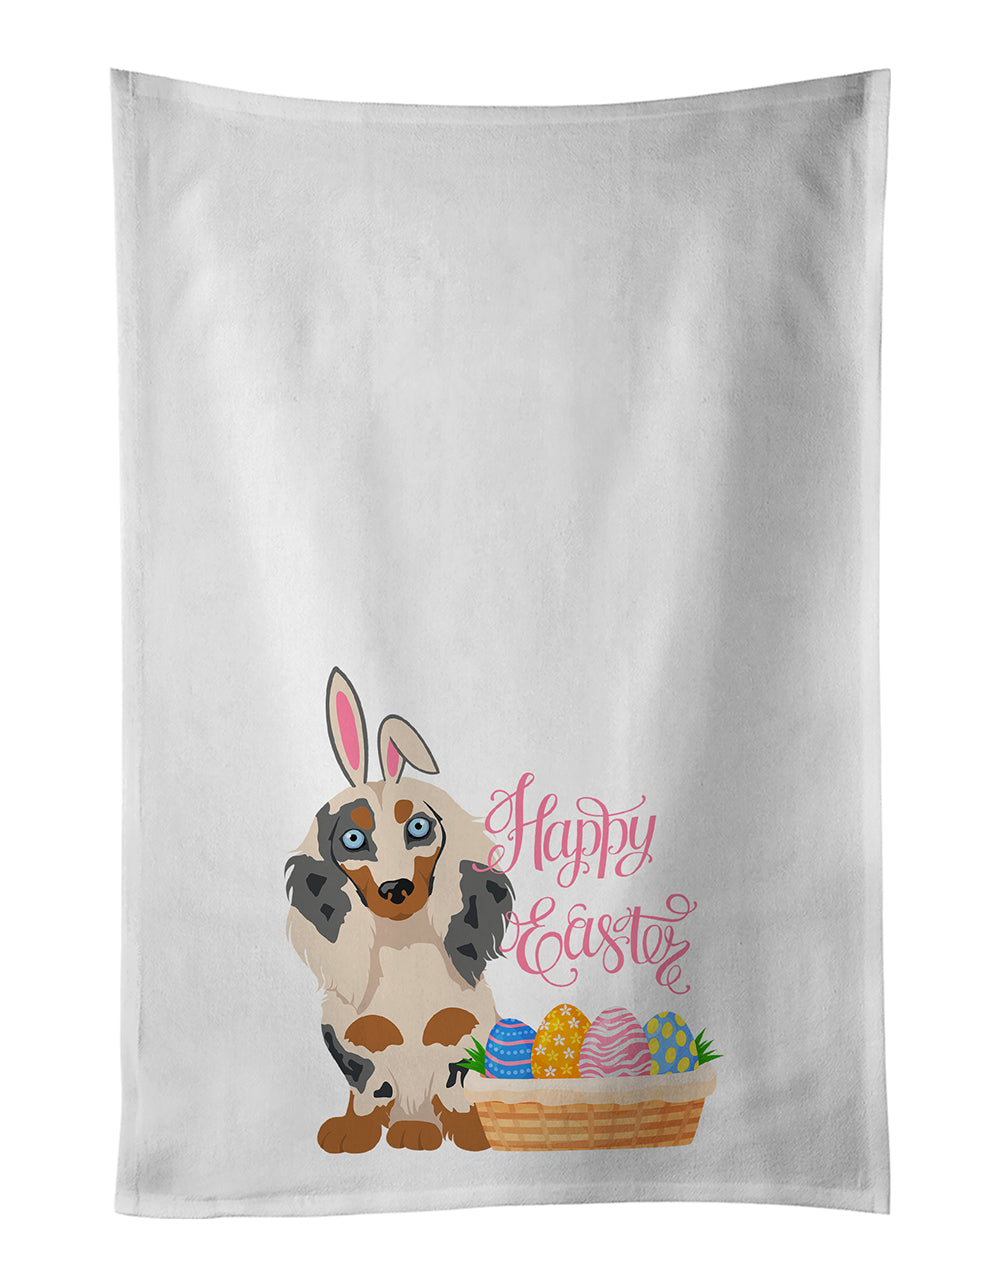 Buy this Longhair Cream Dapple Dachshund Easter White Kitchen Towel Set of 2 Dish Towels